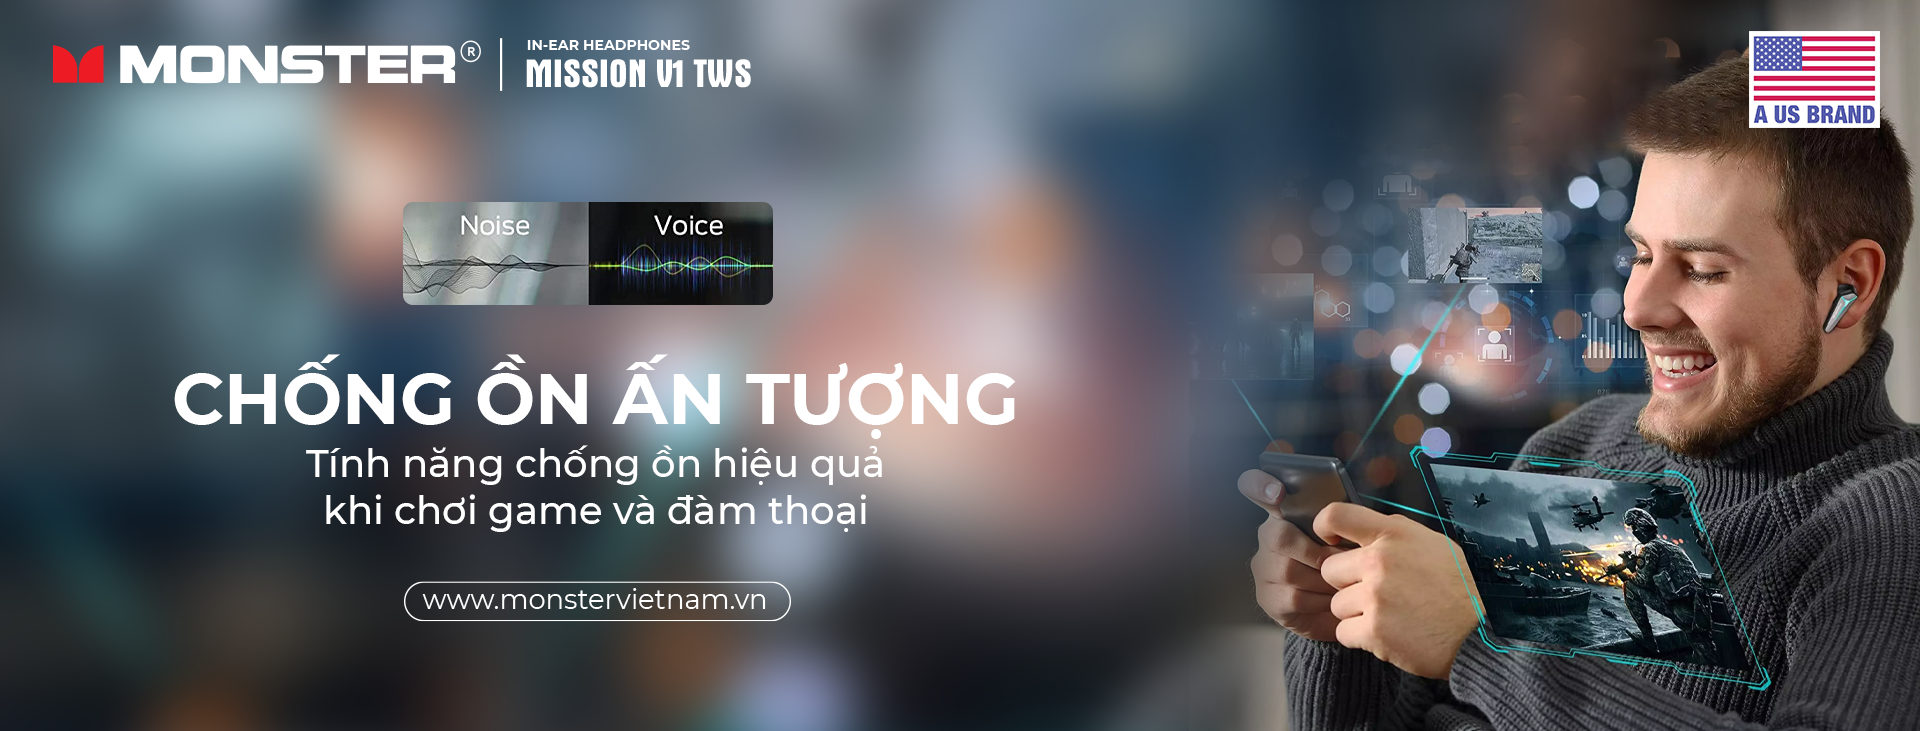 Tai nghe True Wireless Monster Mission V1 | Anh Duy Audio